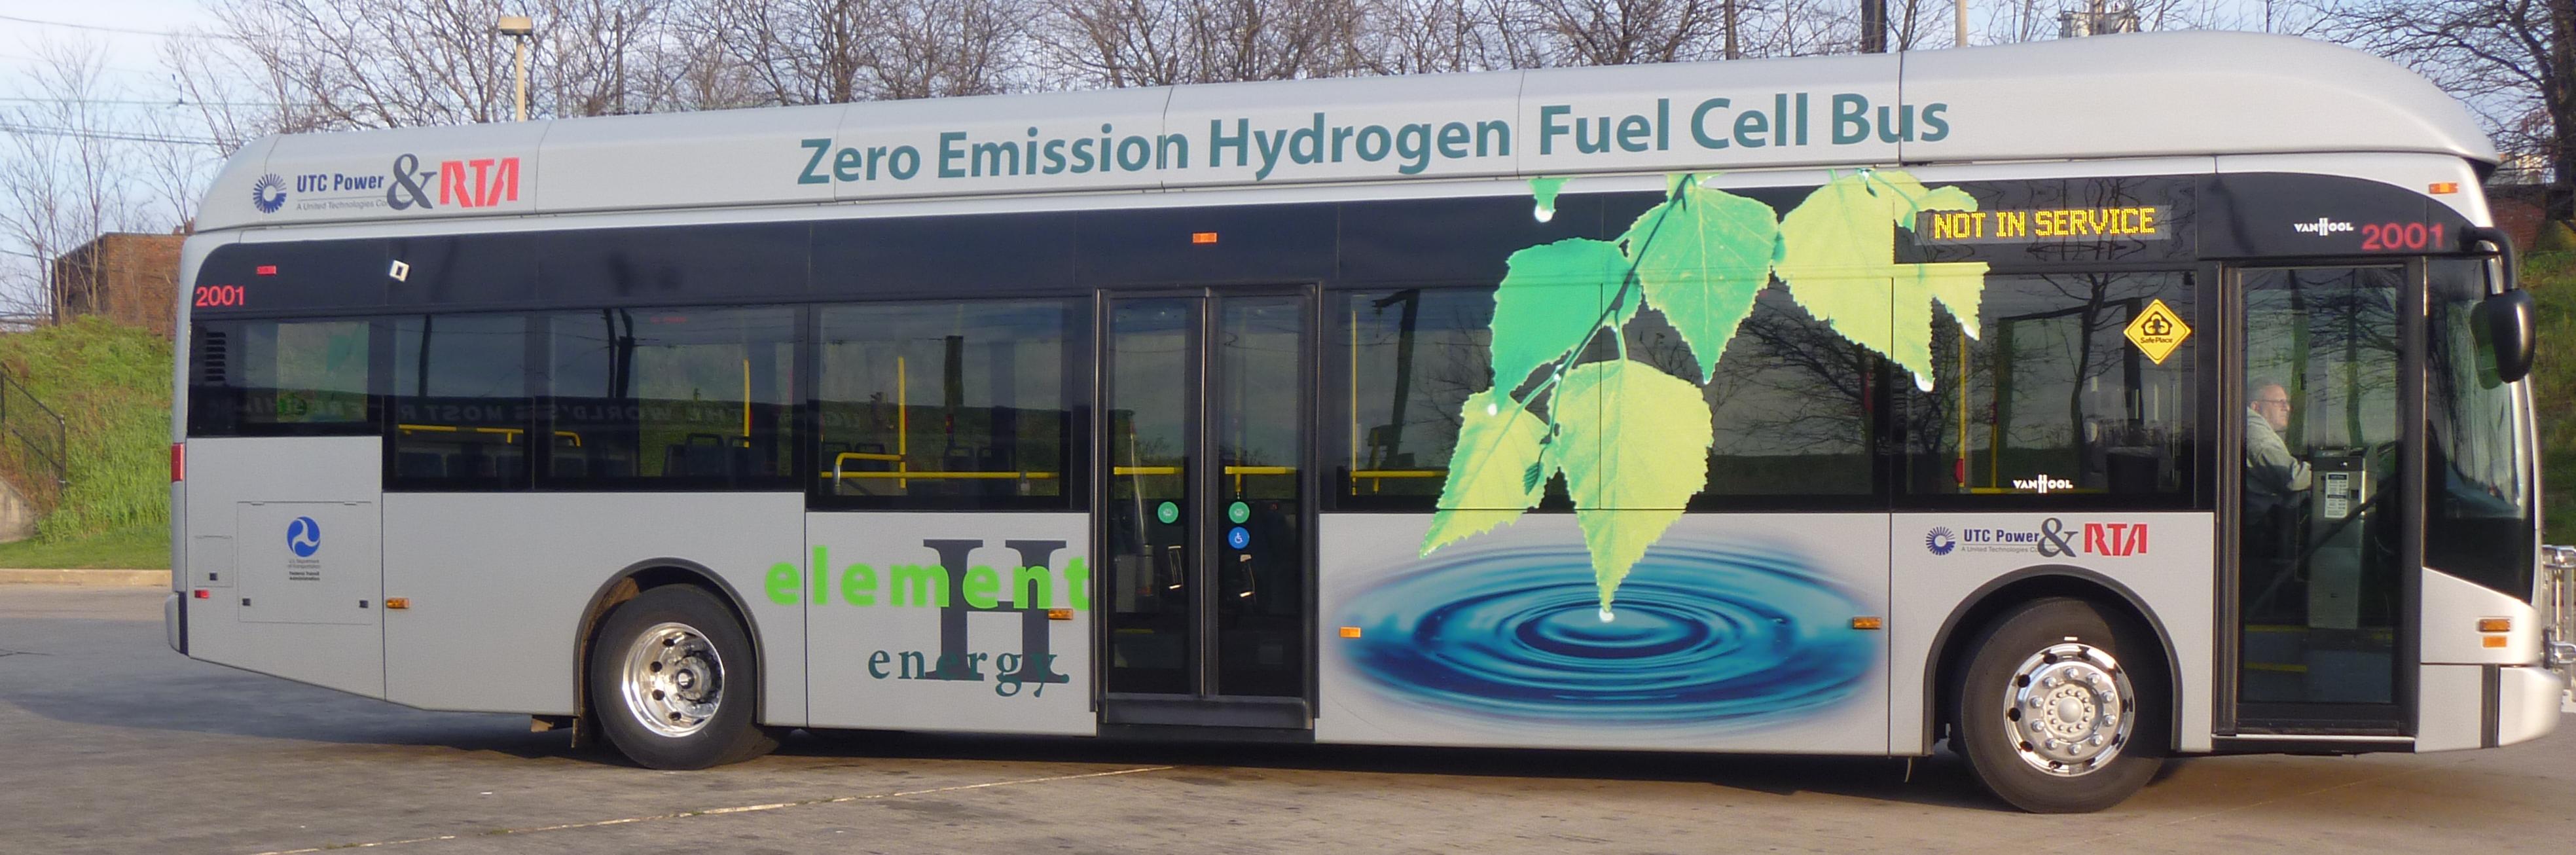  Hydrogen fuel cell bus